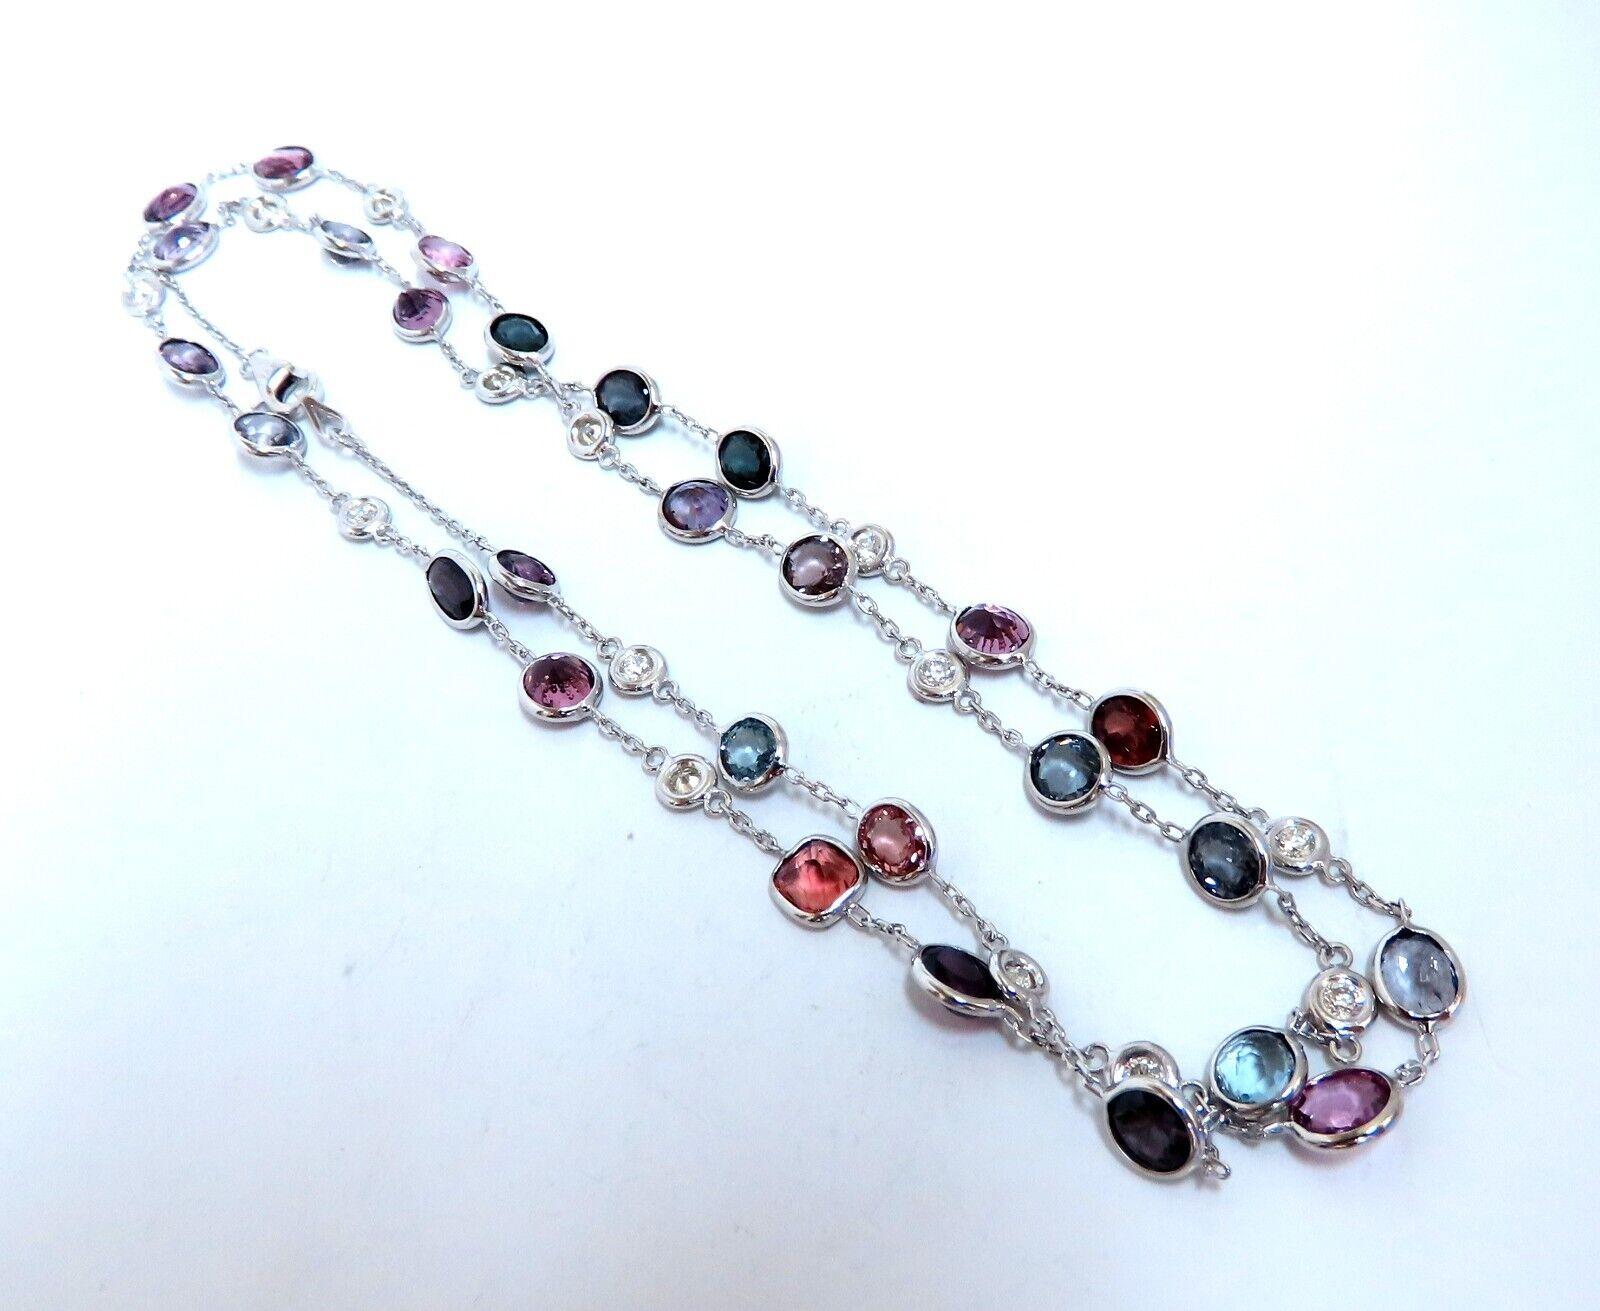 Natural spinel diamonds yard necklace.

Ranging colors: pink, greens, red, purple, blue, and teal.

Ovals, rounds, and cushion cuts.

Average each 5x4 mm

Clean Clarity brilliant cuts

1.05 carat natural round diamonds

H color vs2 clarity

14 karat